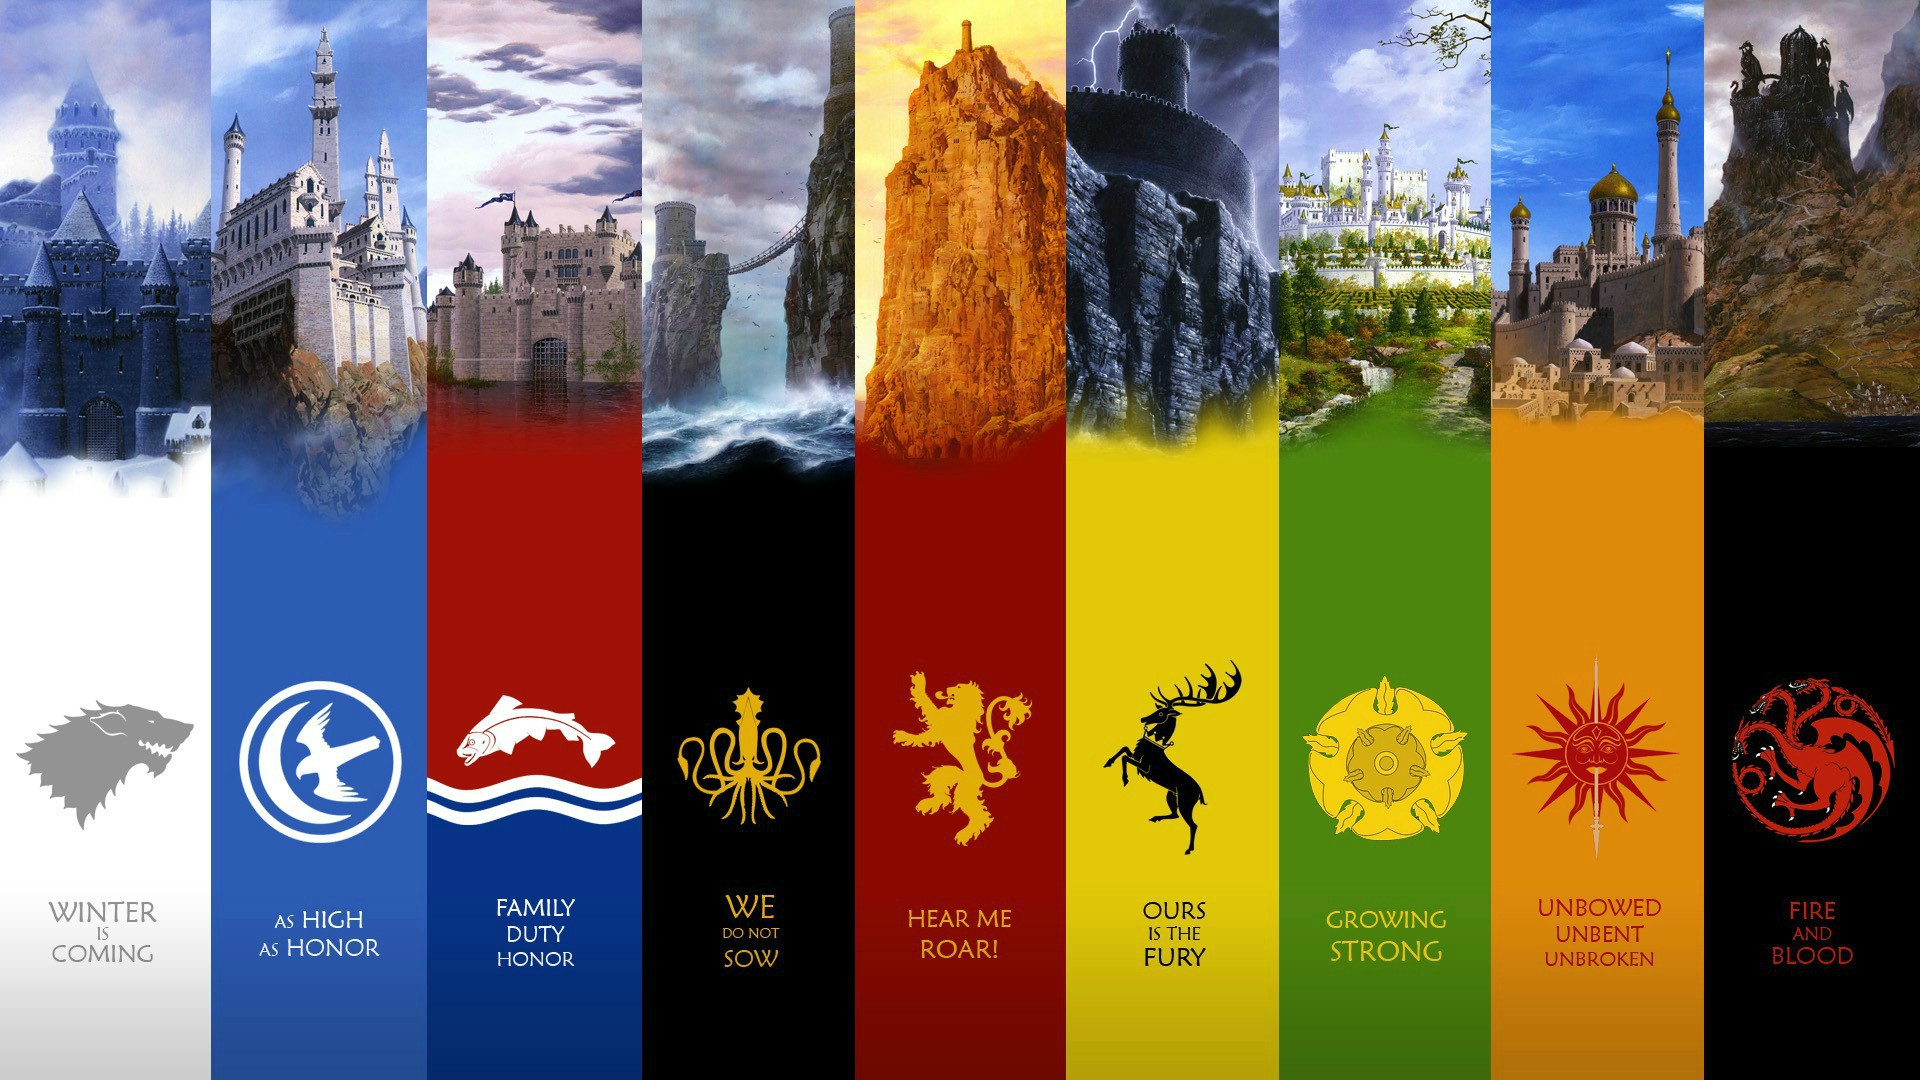 Game of thrones map click to view